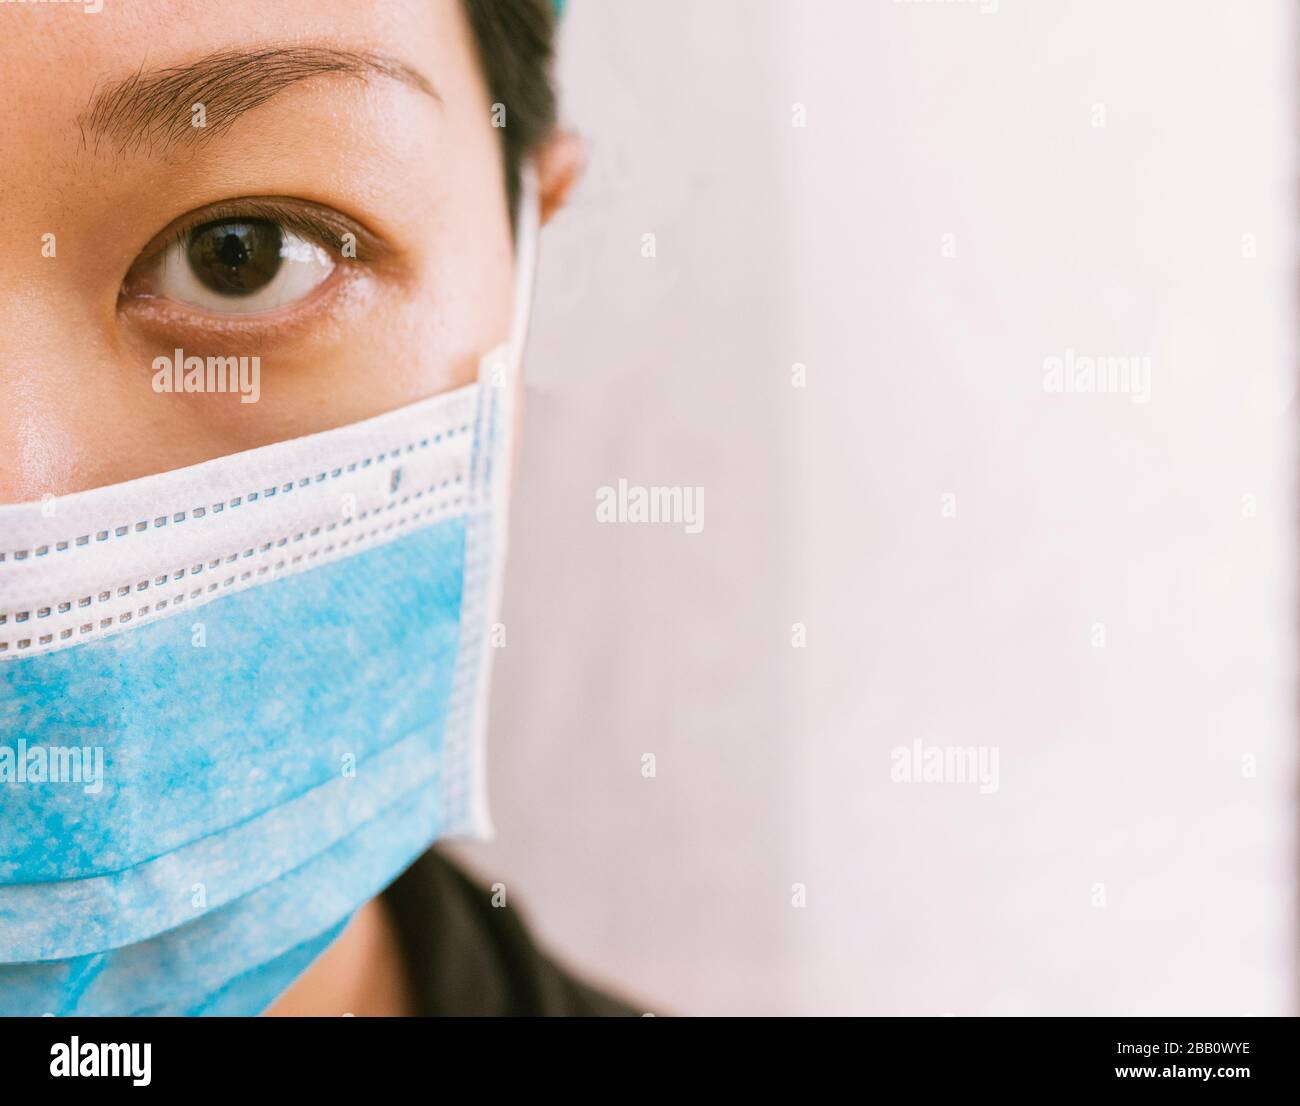 Coronavirus theme. Asian woman  wearing a mask to protect herself from getting infected on a white background. Stock Photo